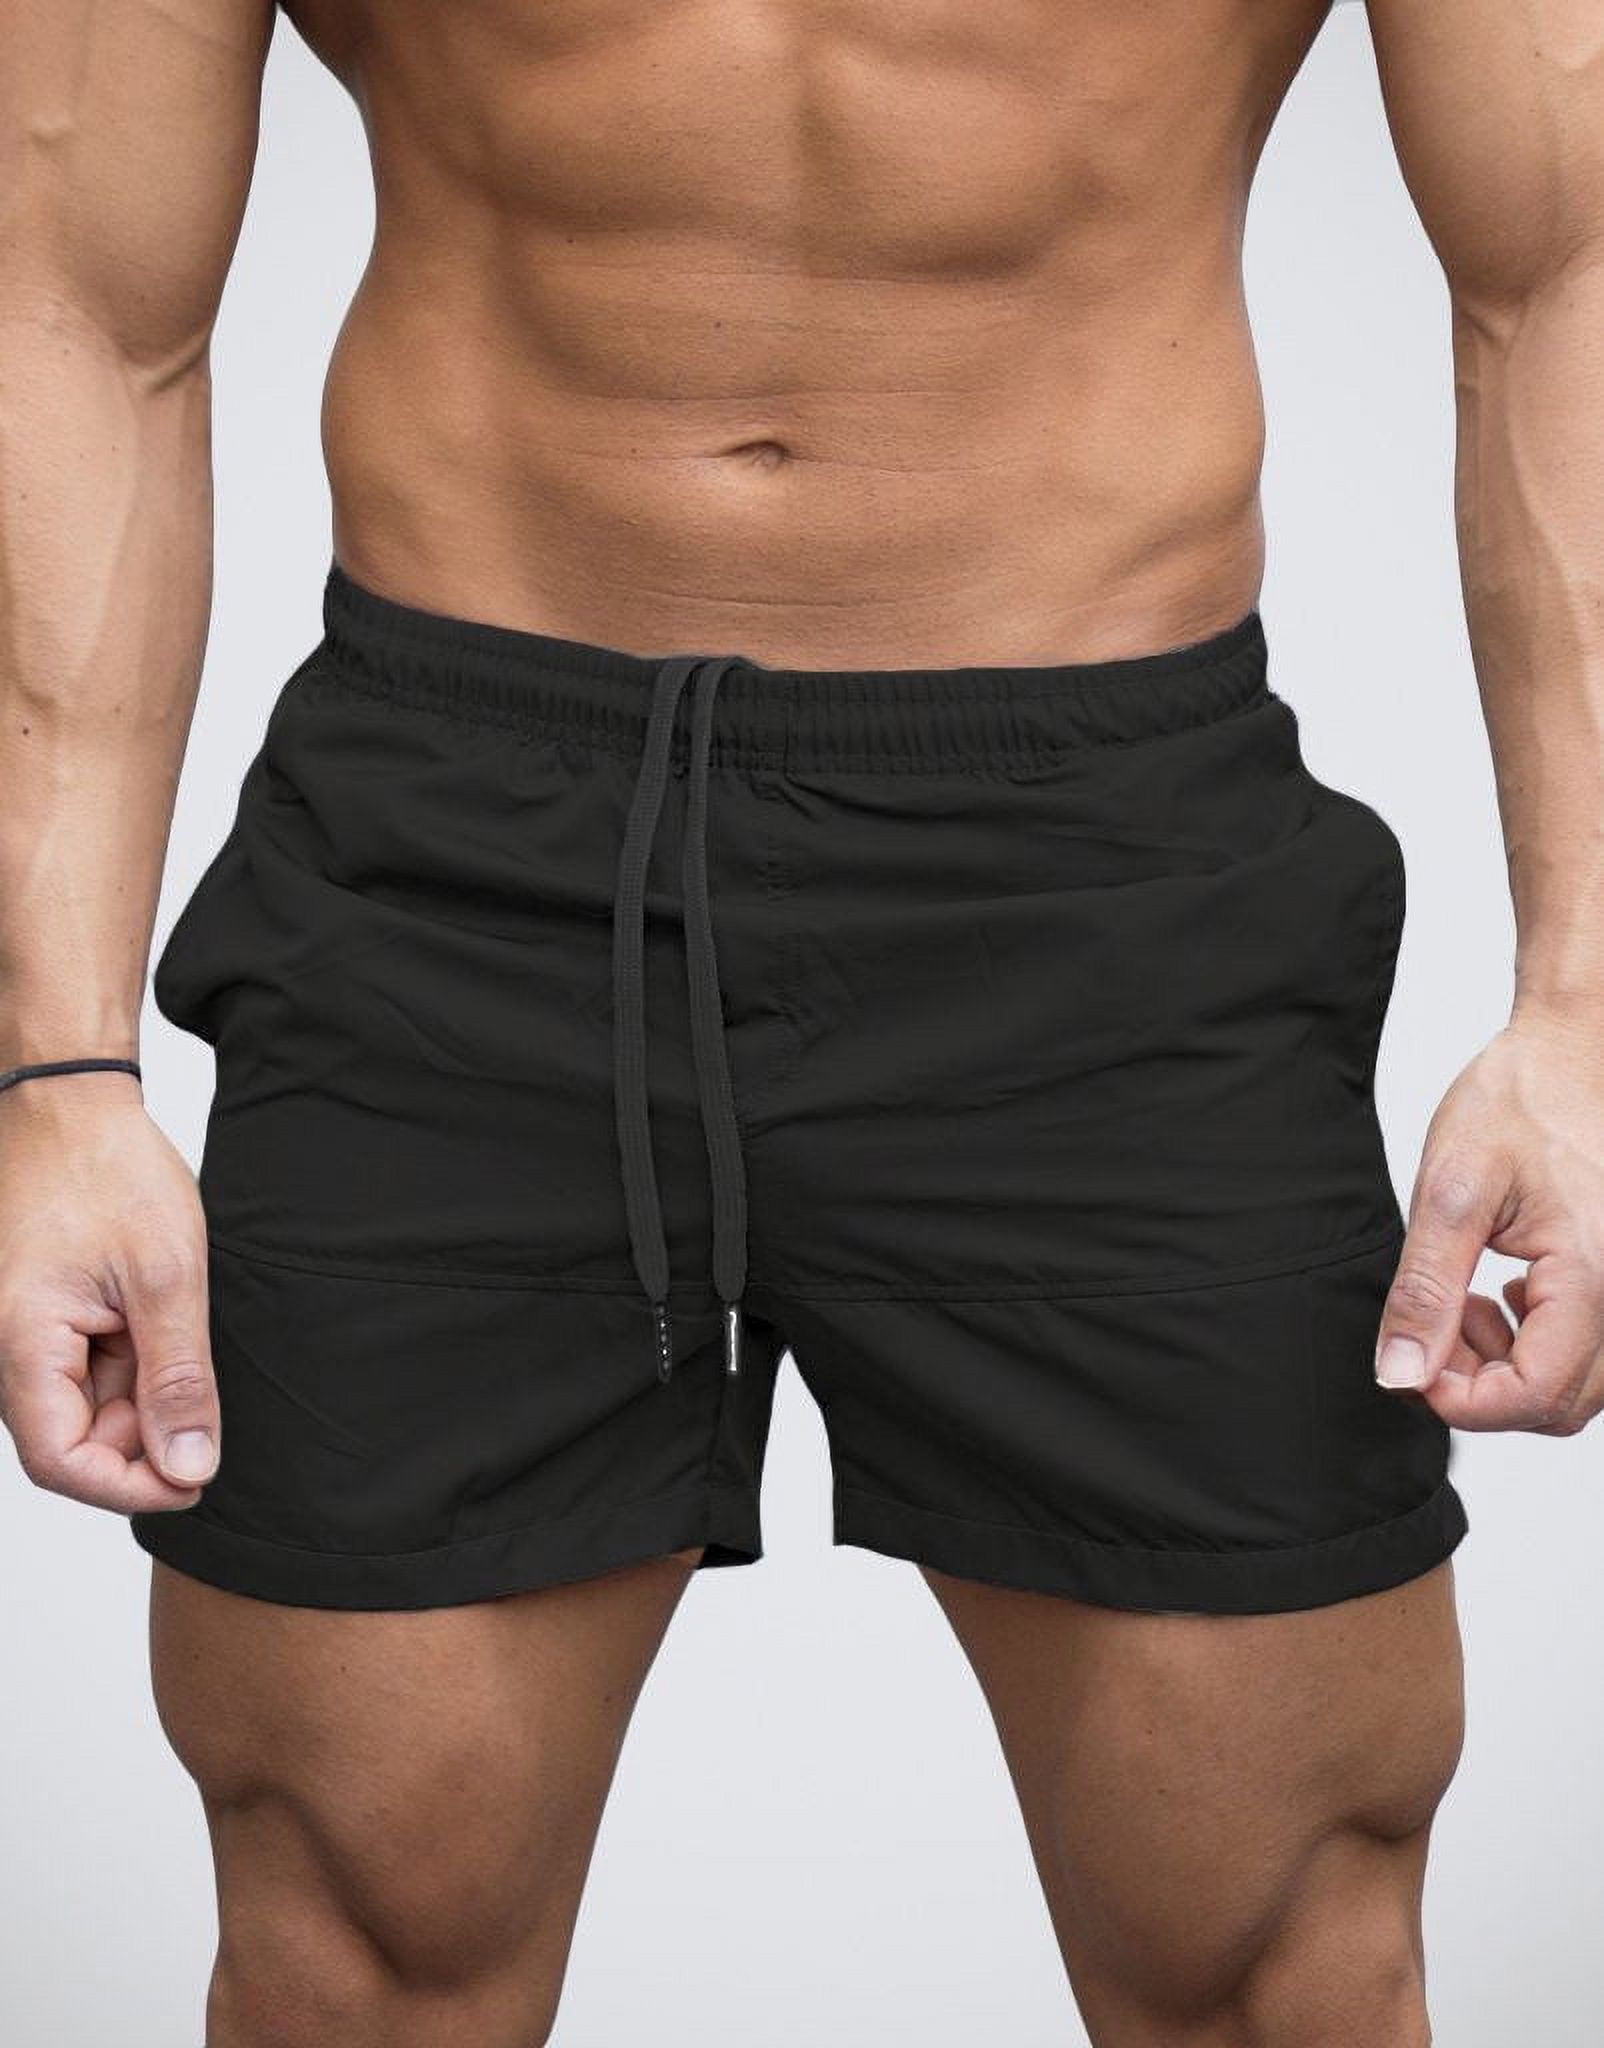 Mens Casual Running Shorts Fitness Gym Crop Pants Sports Jogging Beach ...